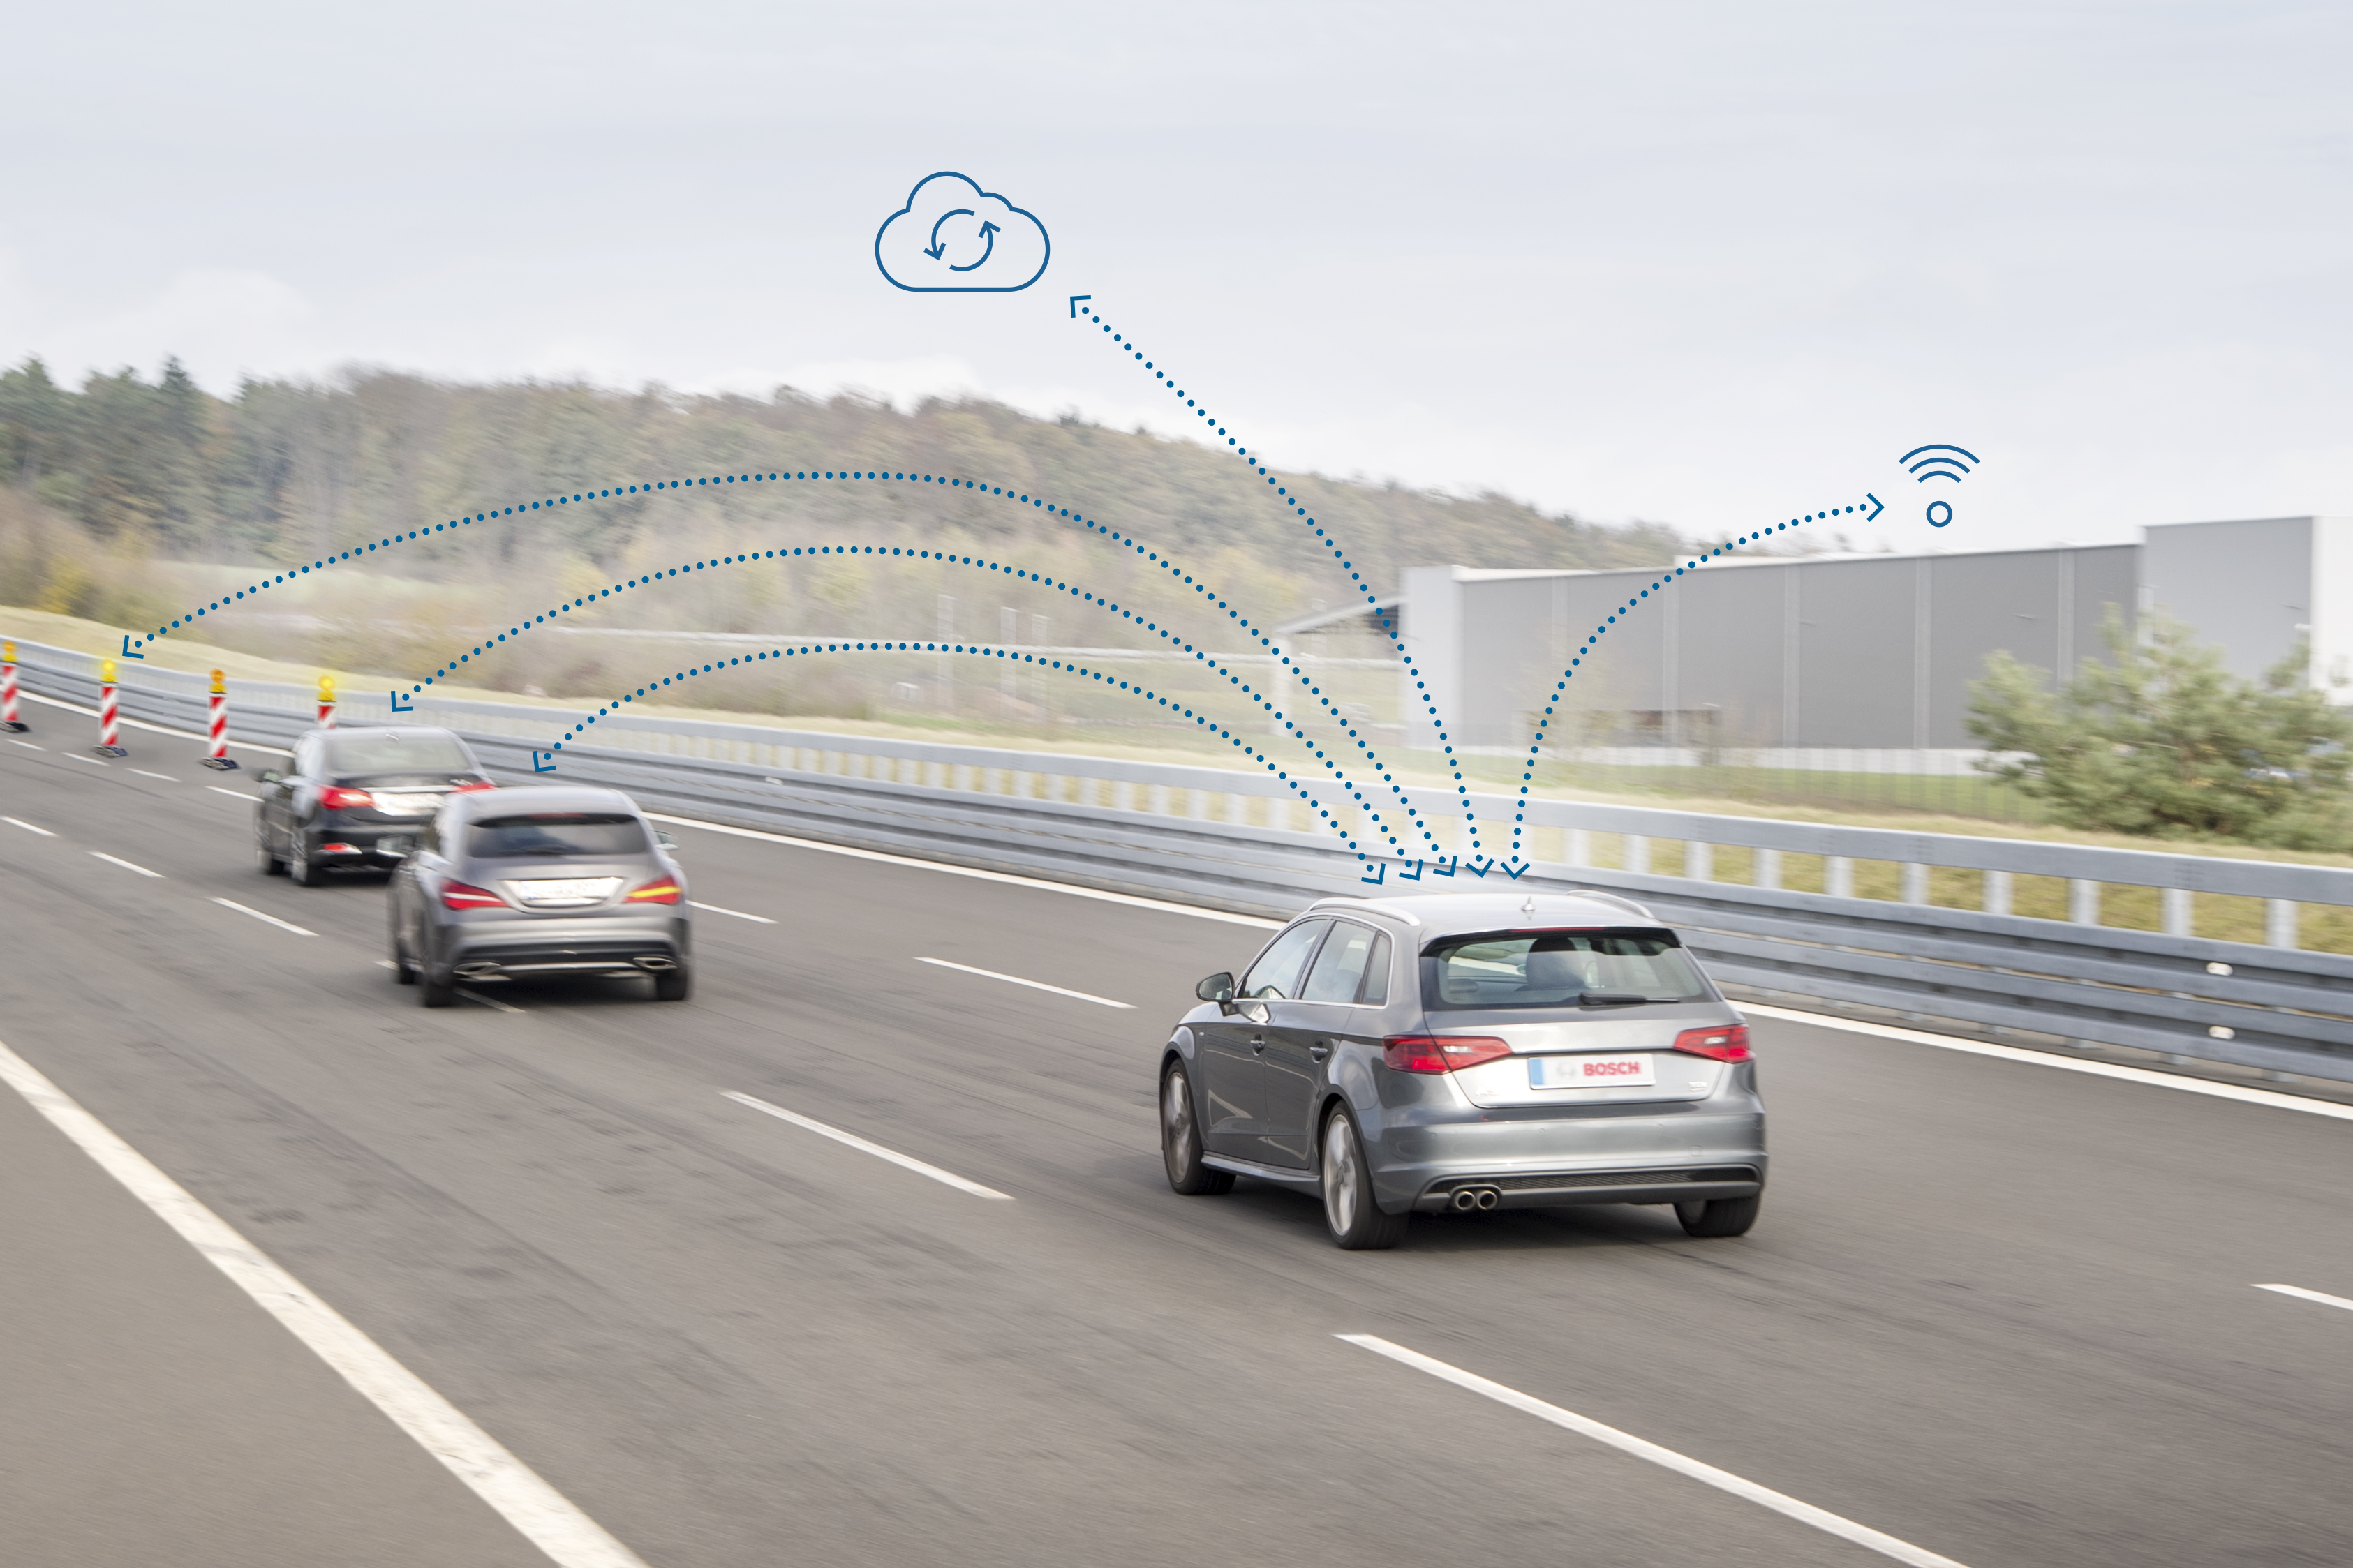 Alerts in critical situations through vehicle-to-x communication from Bosch 